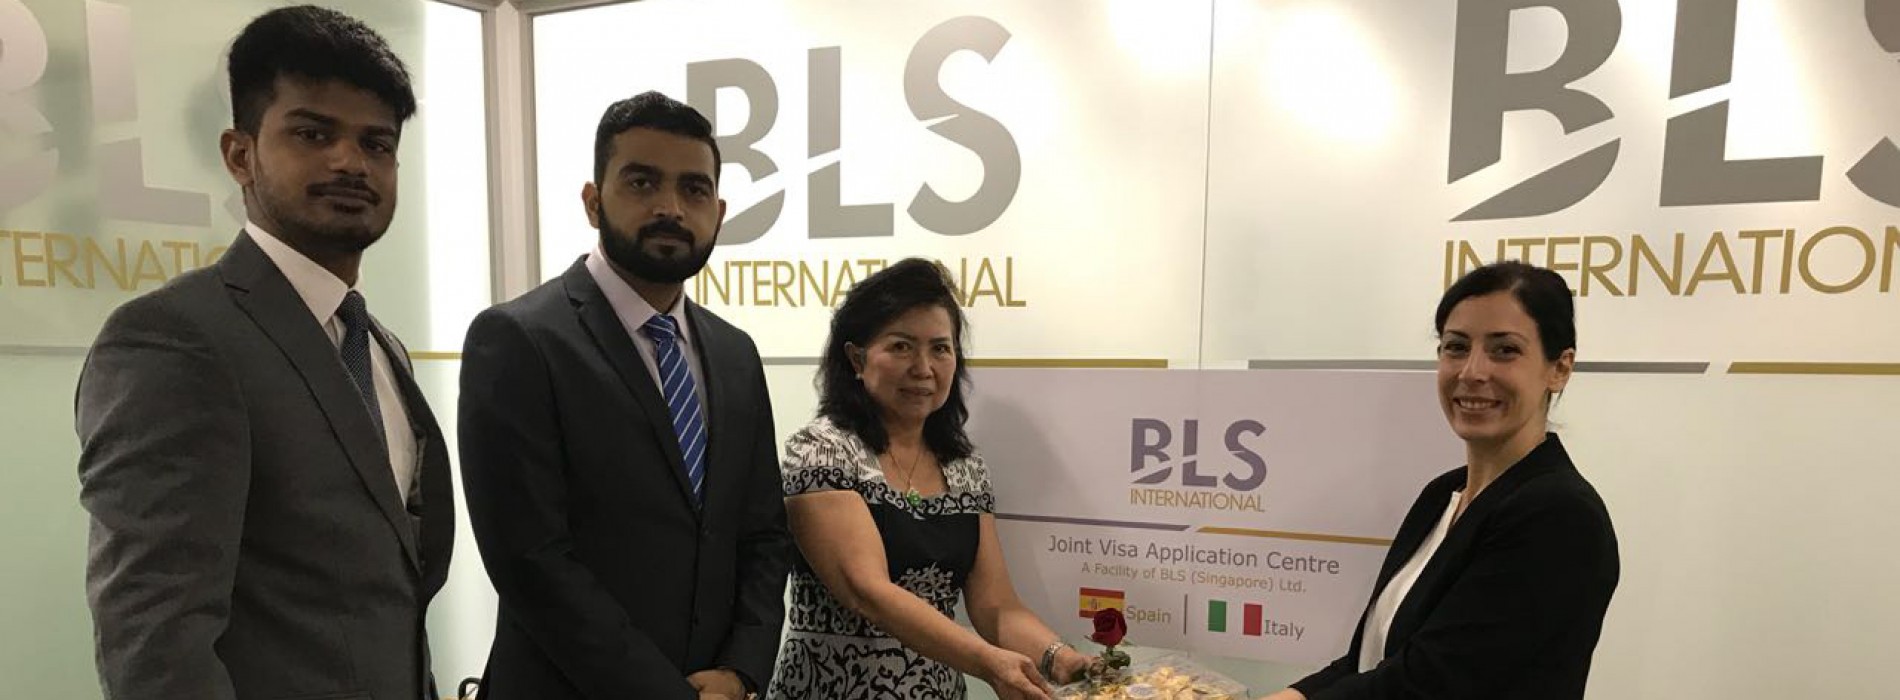 BLS International launches Italy Visa Application Center in Singapore